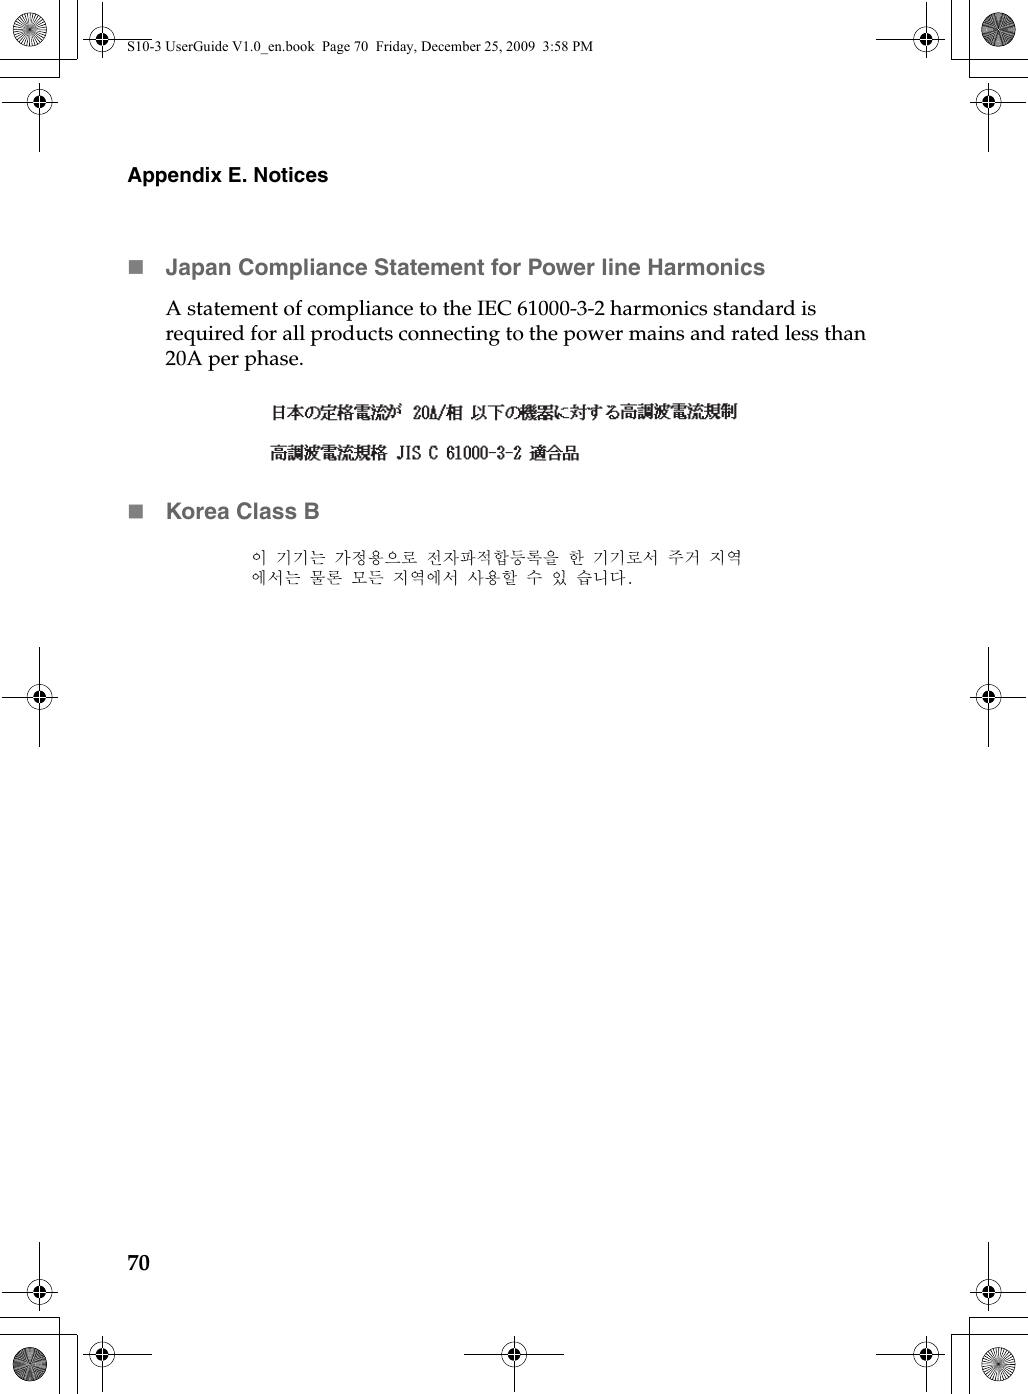 70Appendix E. NoticesJapan Compliance Statement for Power line HarmonicsA statement of compliance to the IEC 61000-3-2 harmonics standard is required for all products connecting to the power mains and rated less than 20A per phase.Korea Class BS10-3 UserGuide V1.0_en.book  Page 70  Friday, December 25, 2009  3:58 PM